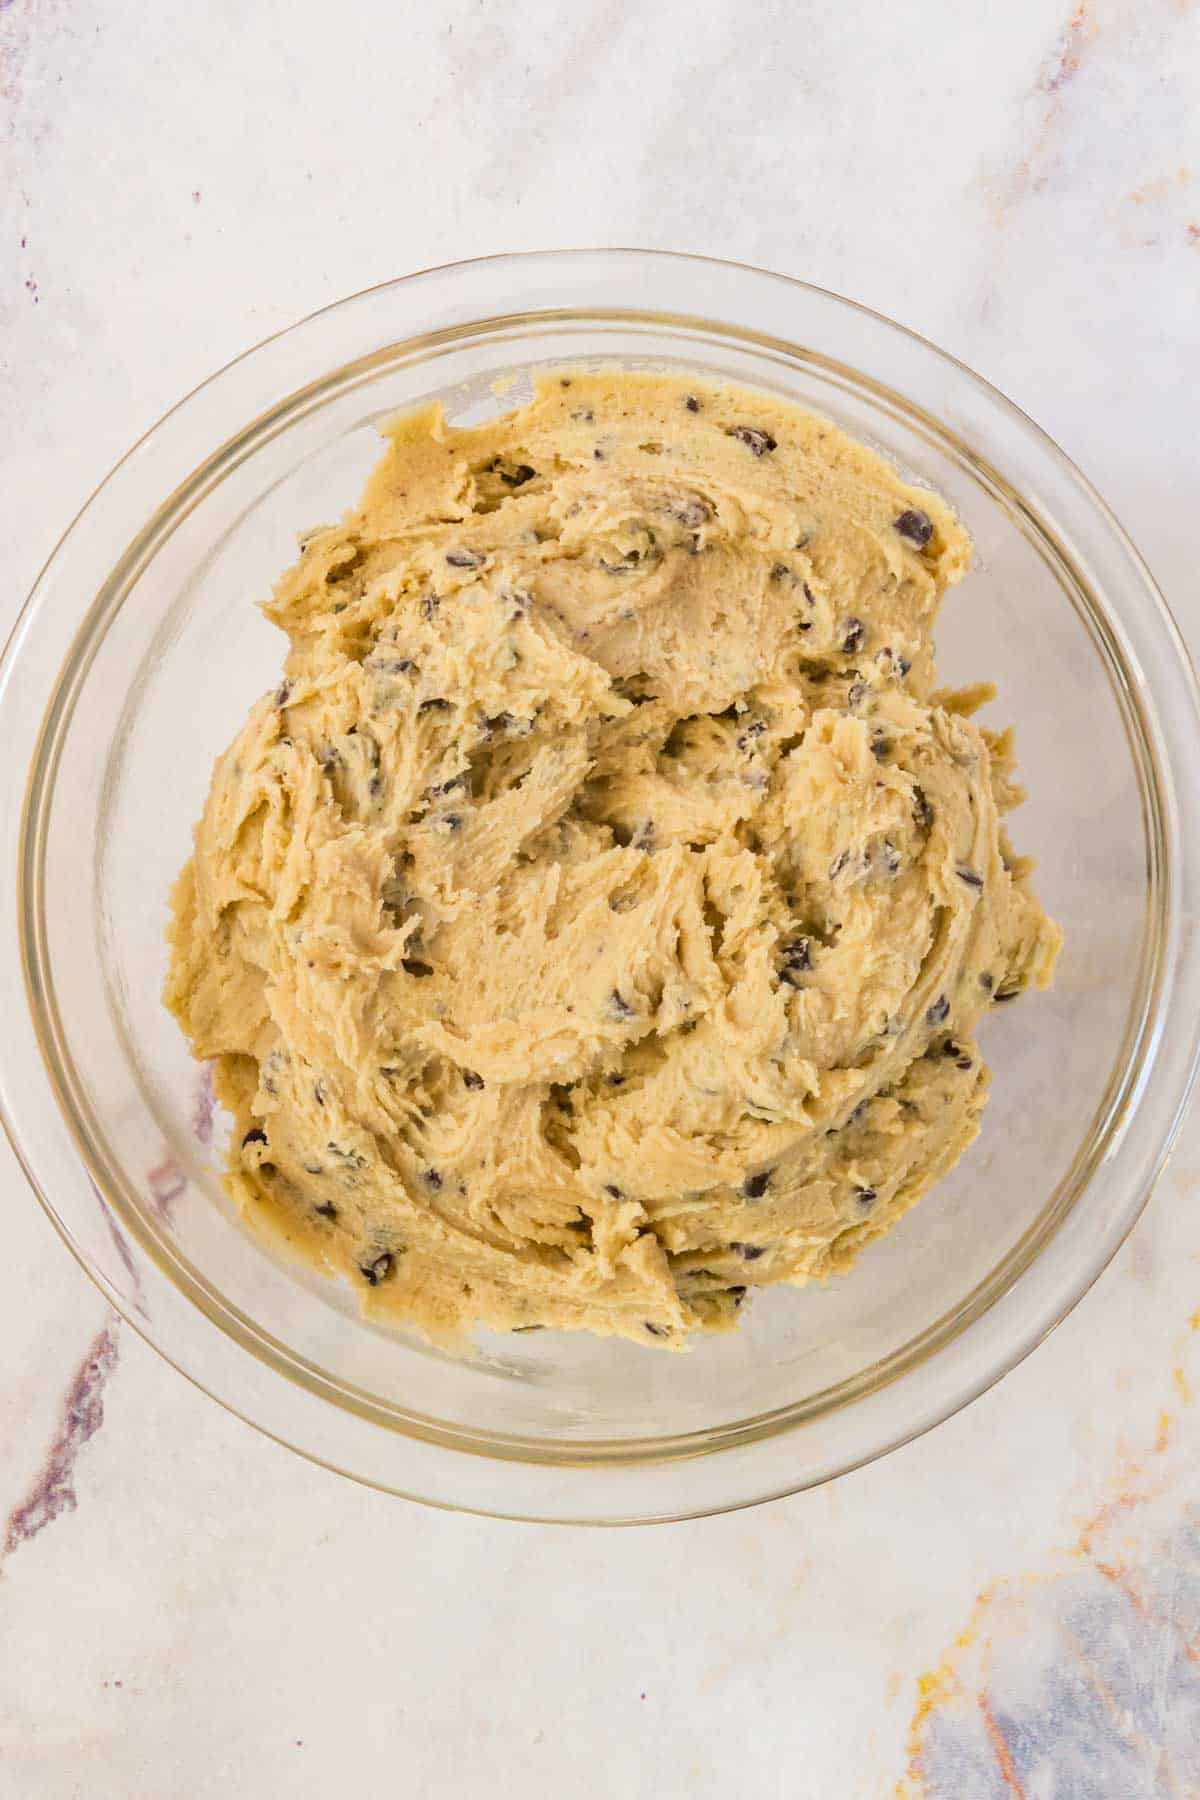 Gluten free chocolate chip cookie dough in a glass mixing bowl.